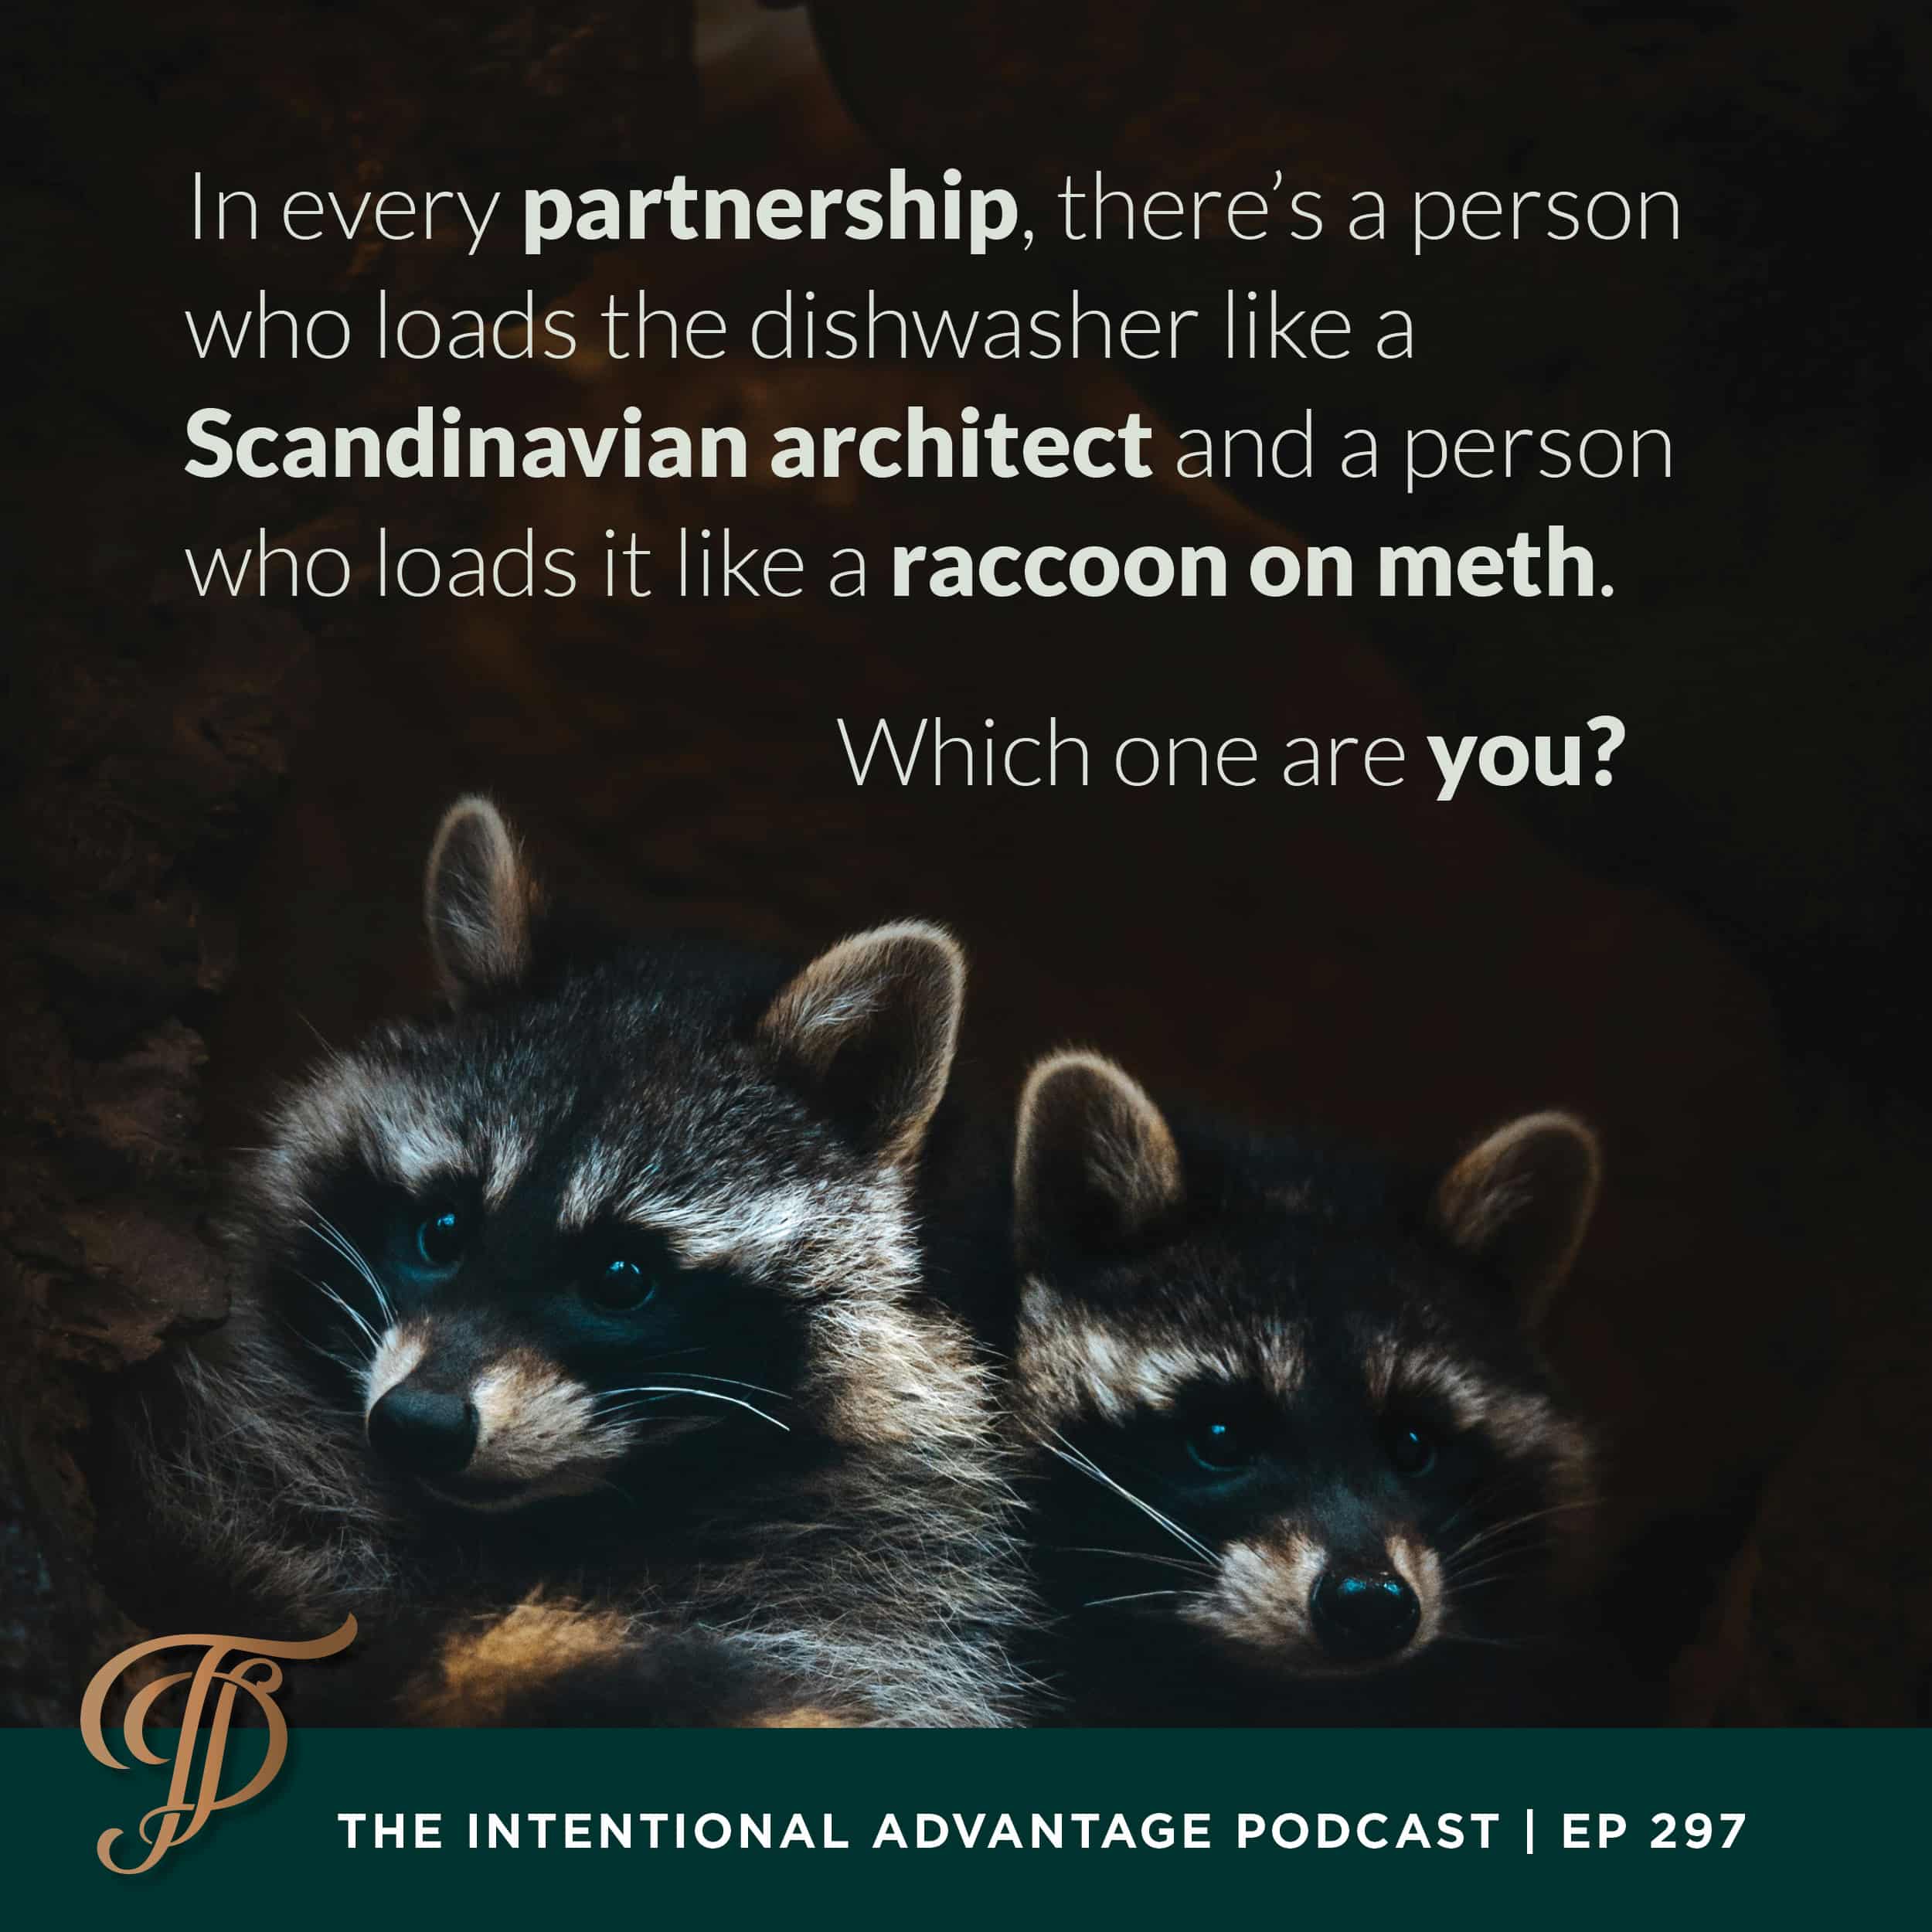 Intentional Advantage Podcast with Tanya Dalton and John Dalton The secret to a great marriage